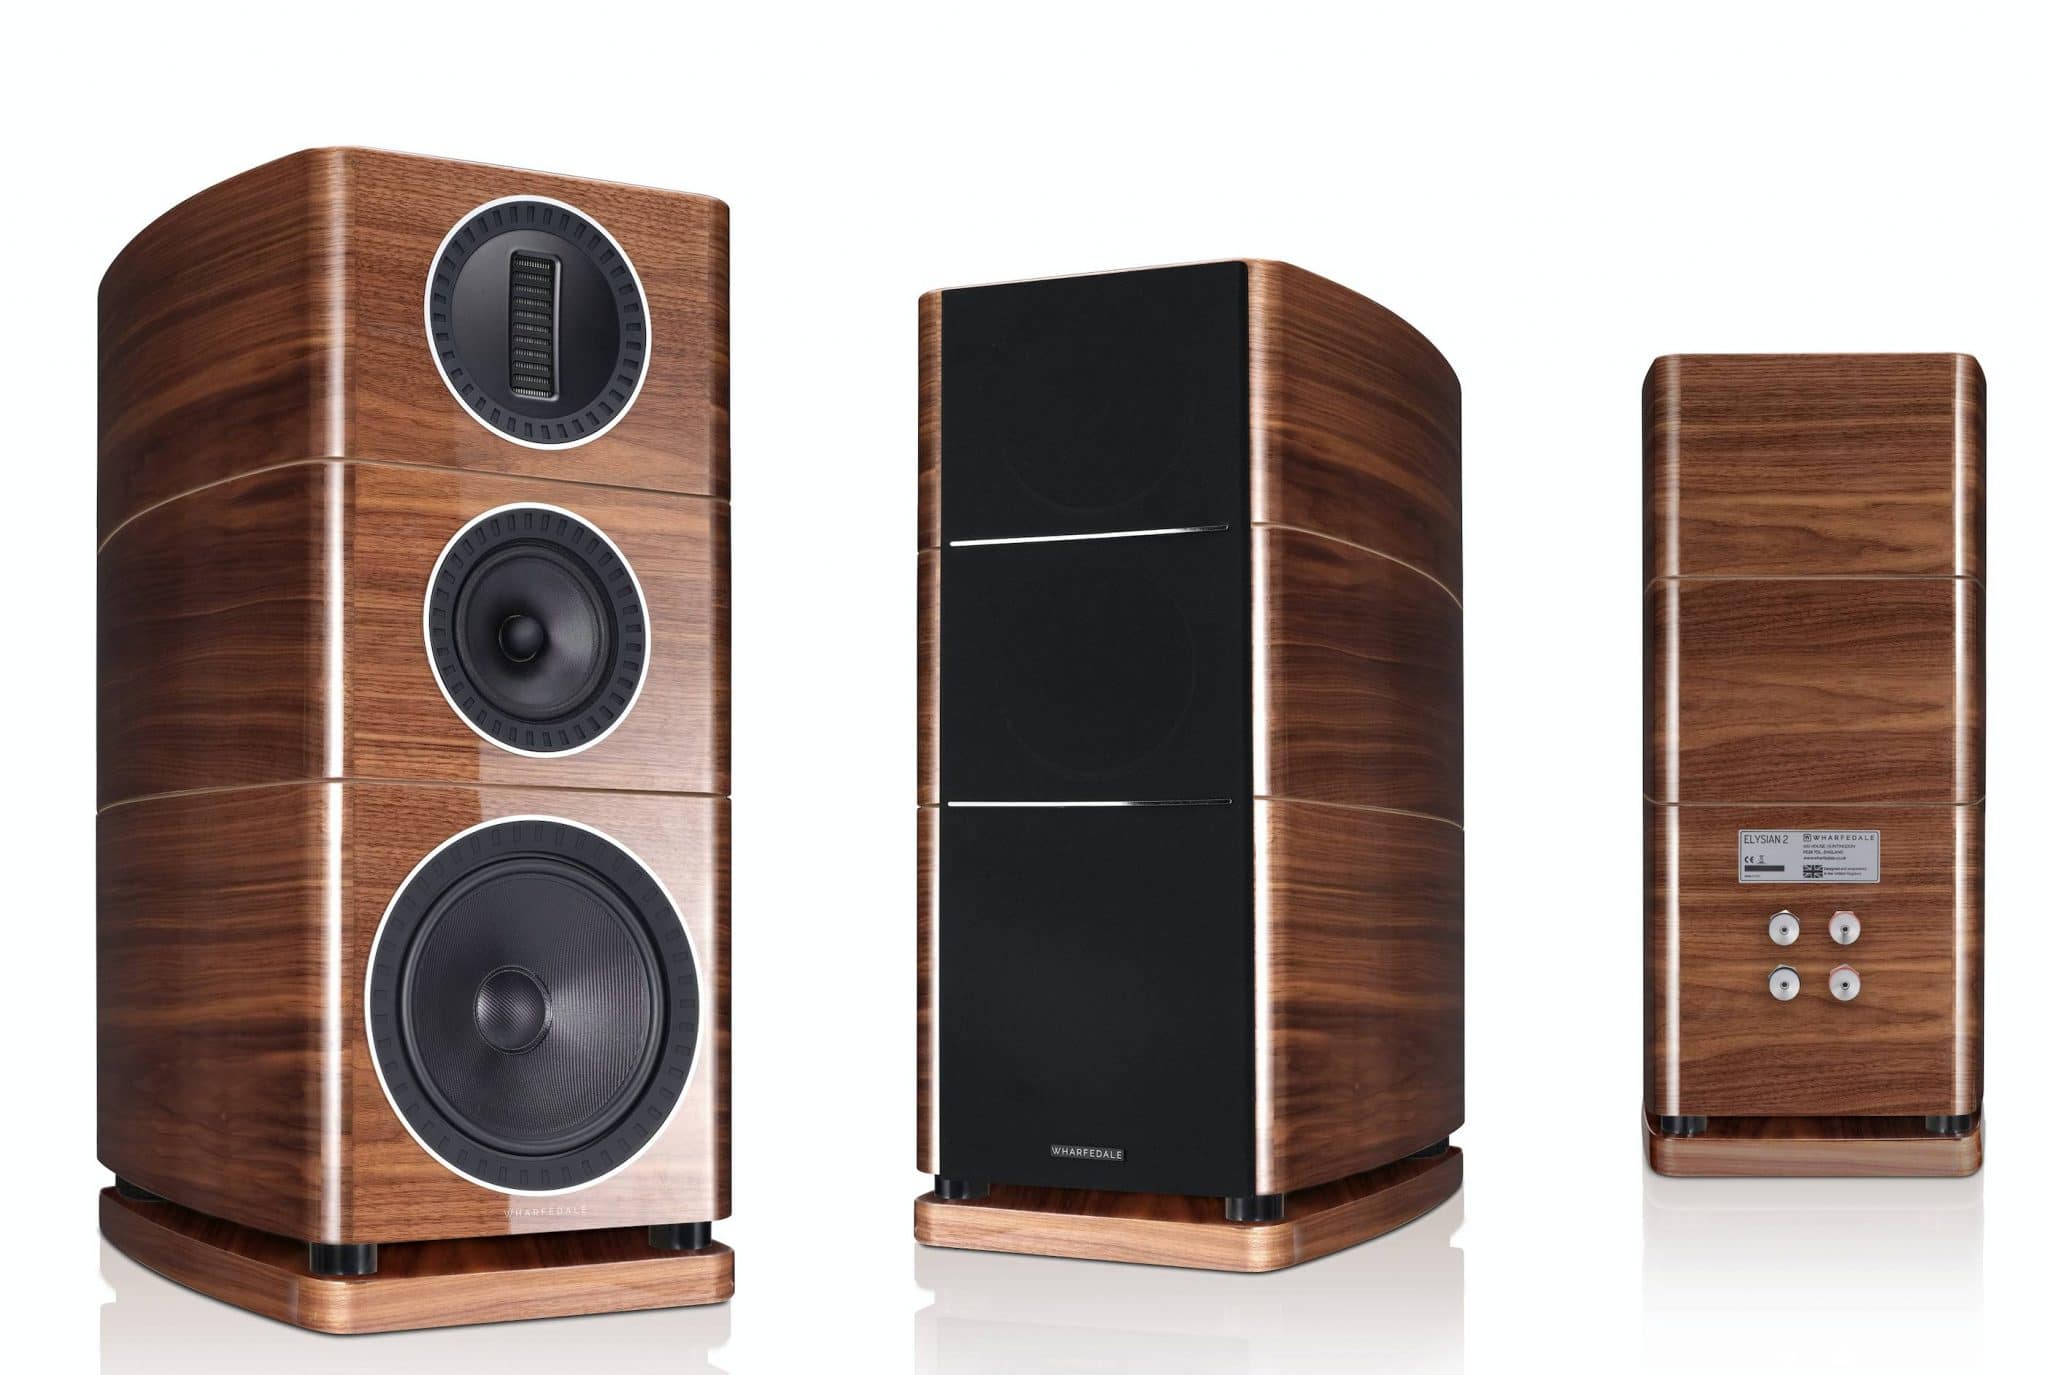 Elysian speakers From Wharfedale